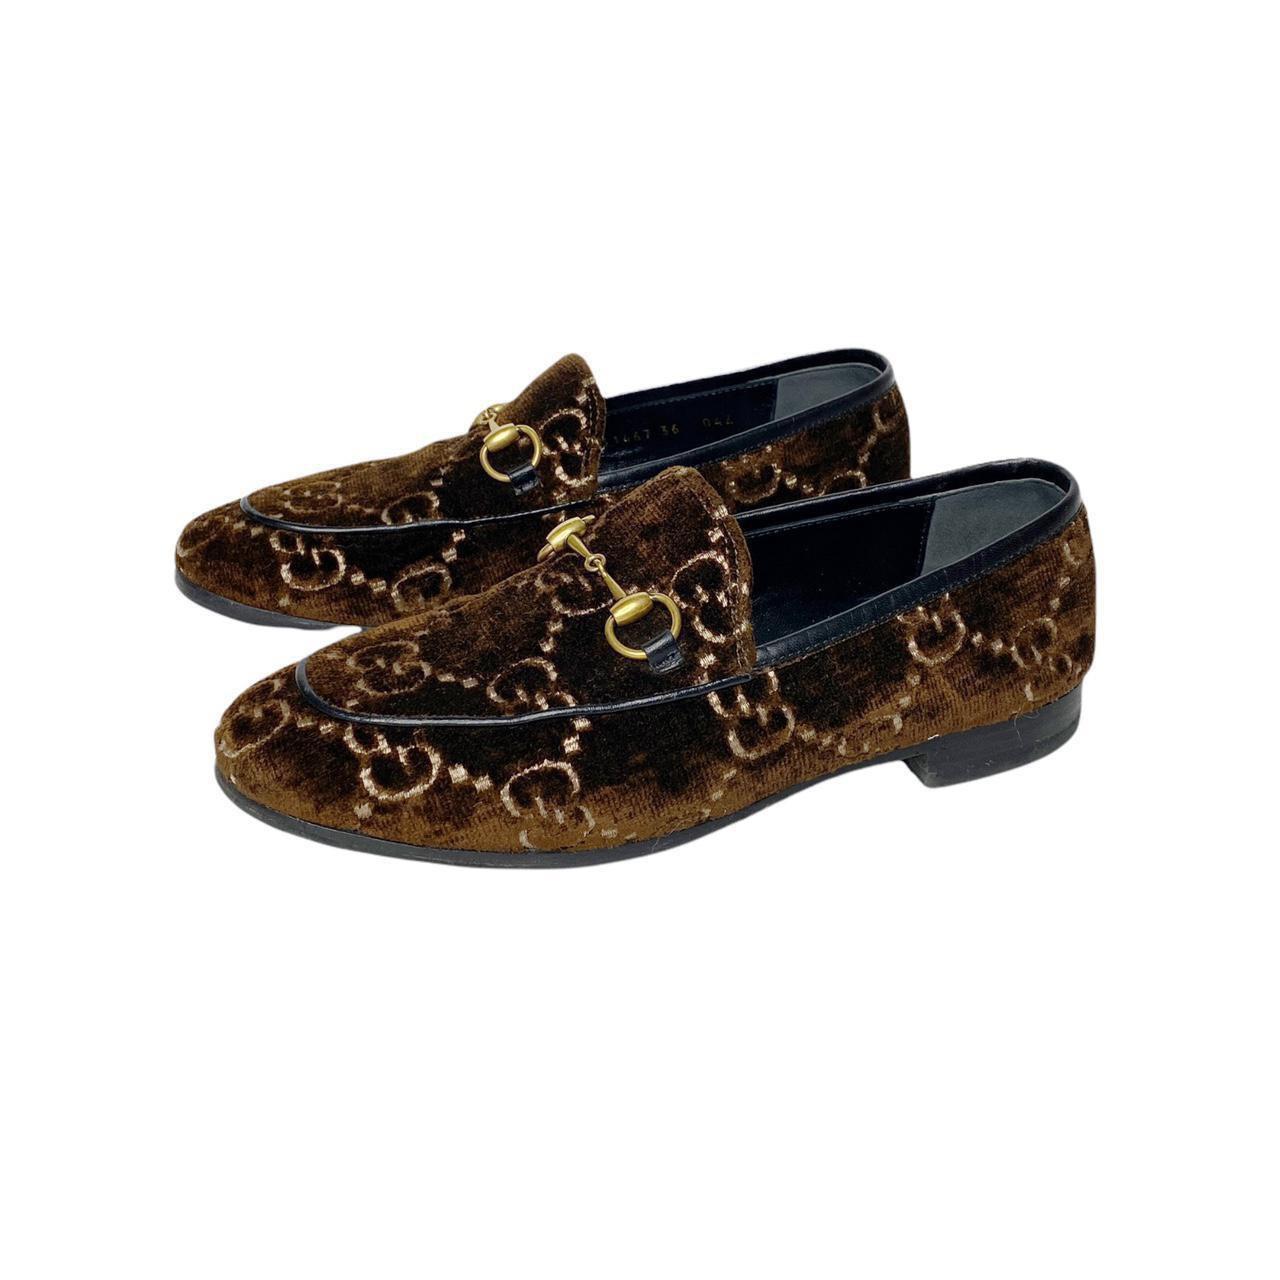 Gucci Brown Jordaan GG Velvet Monogram Loafers
Smart Classic Designer Shoes

CONDITION: This item is a vintage/pre-worn piece so some signs of natural wear and age are to be expected, however in good general condition. Please see the pictures, as